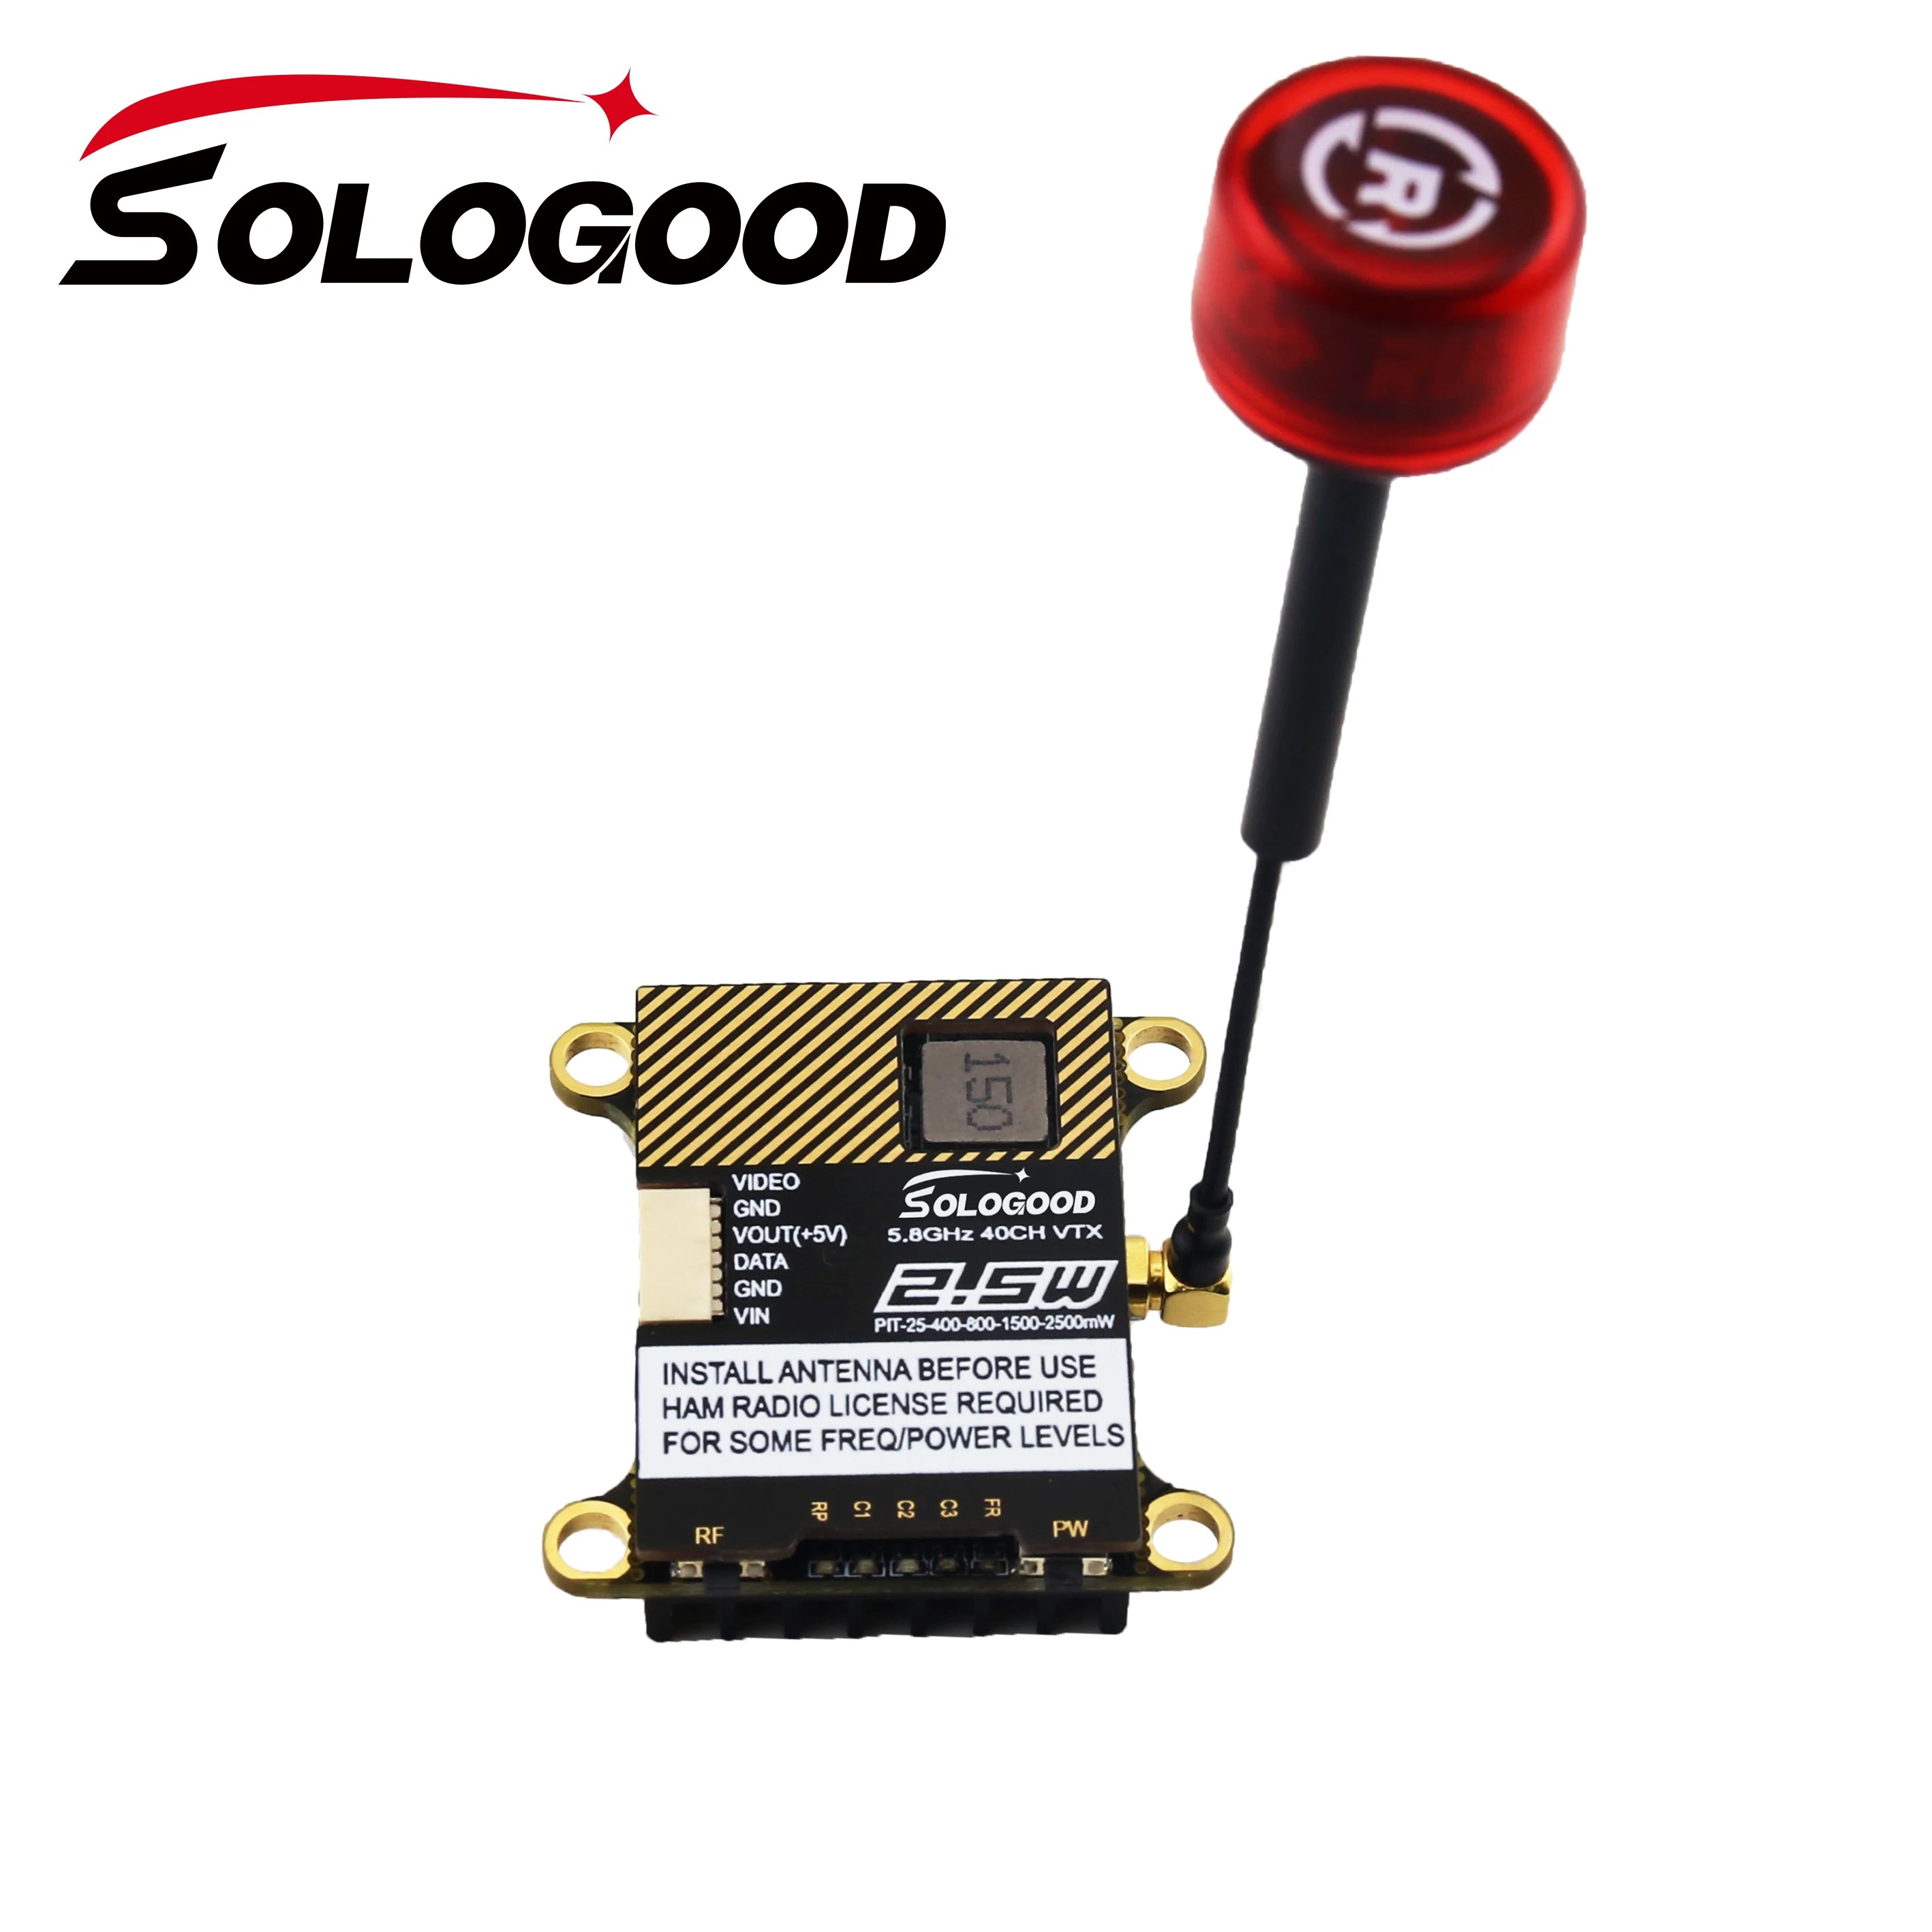 SoloGood 5.8G 2.5W 40CH VTX, HAM RADIO LICENSE REQUIRED FOR SOME FREQPOWER